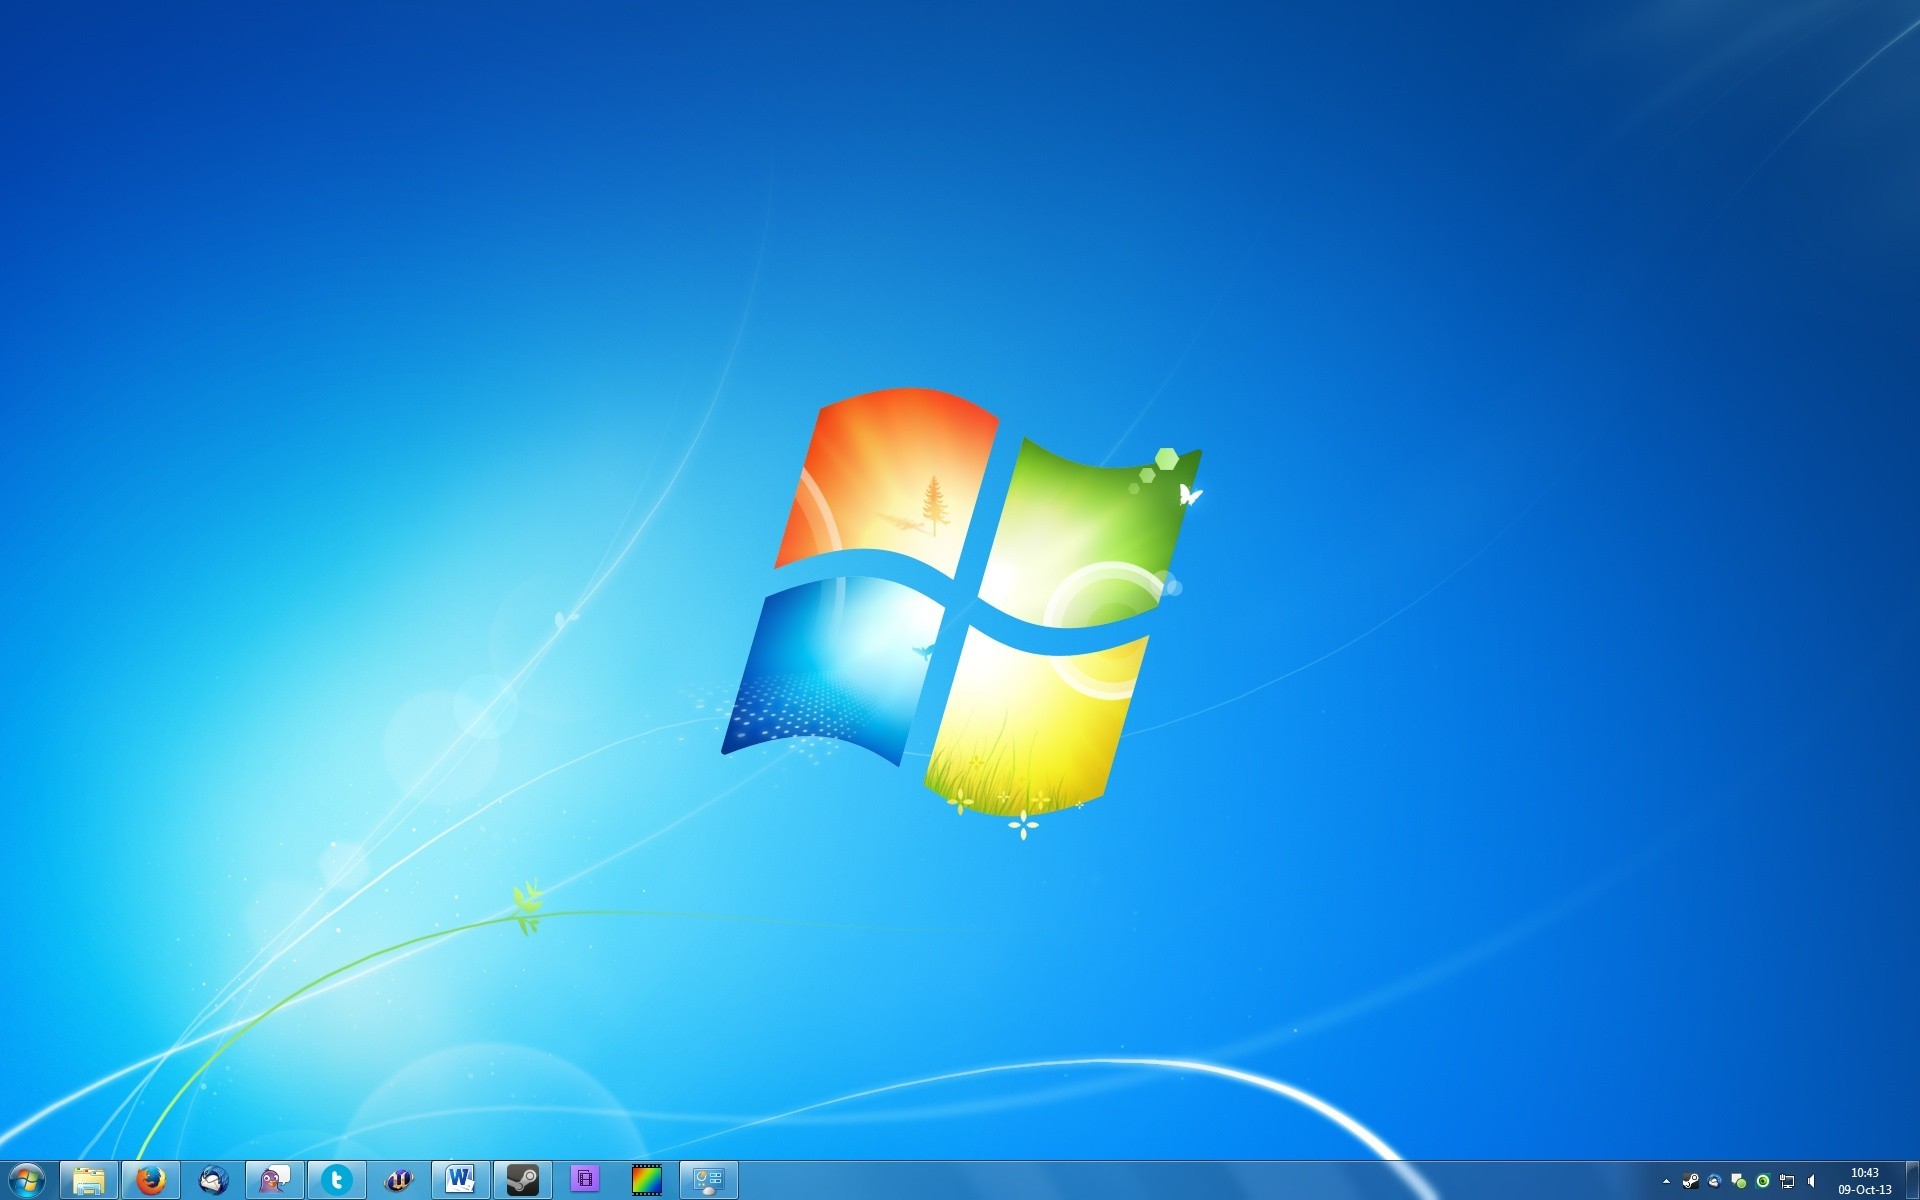 Three Reasons You Shouldn’t Pay for Windows 7 Updates